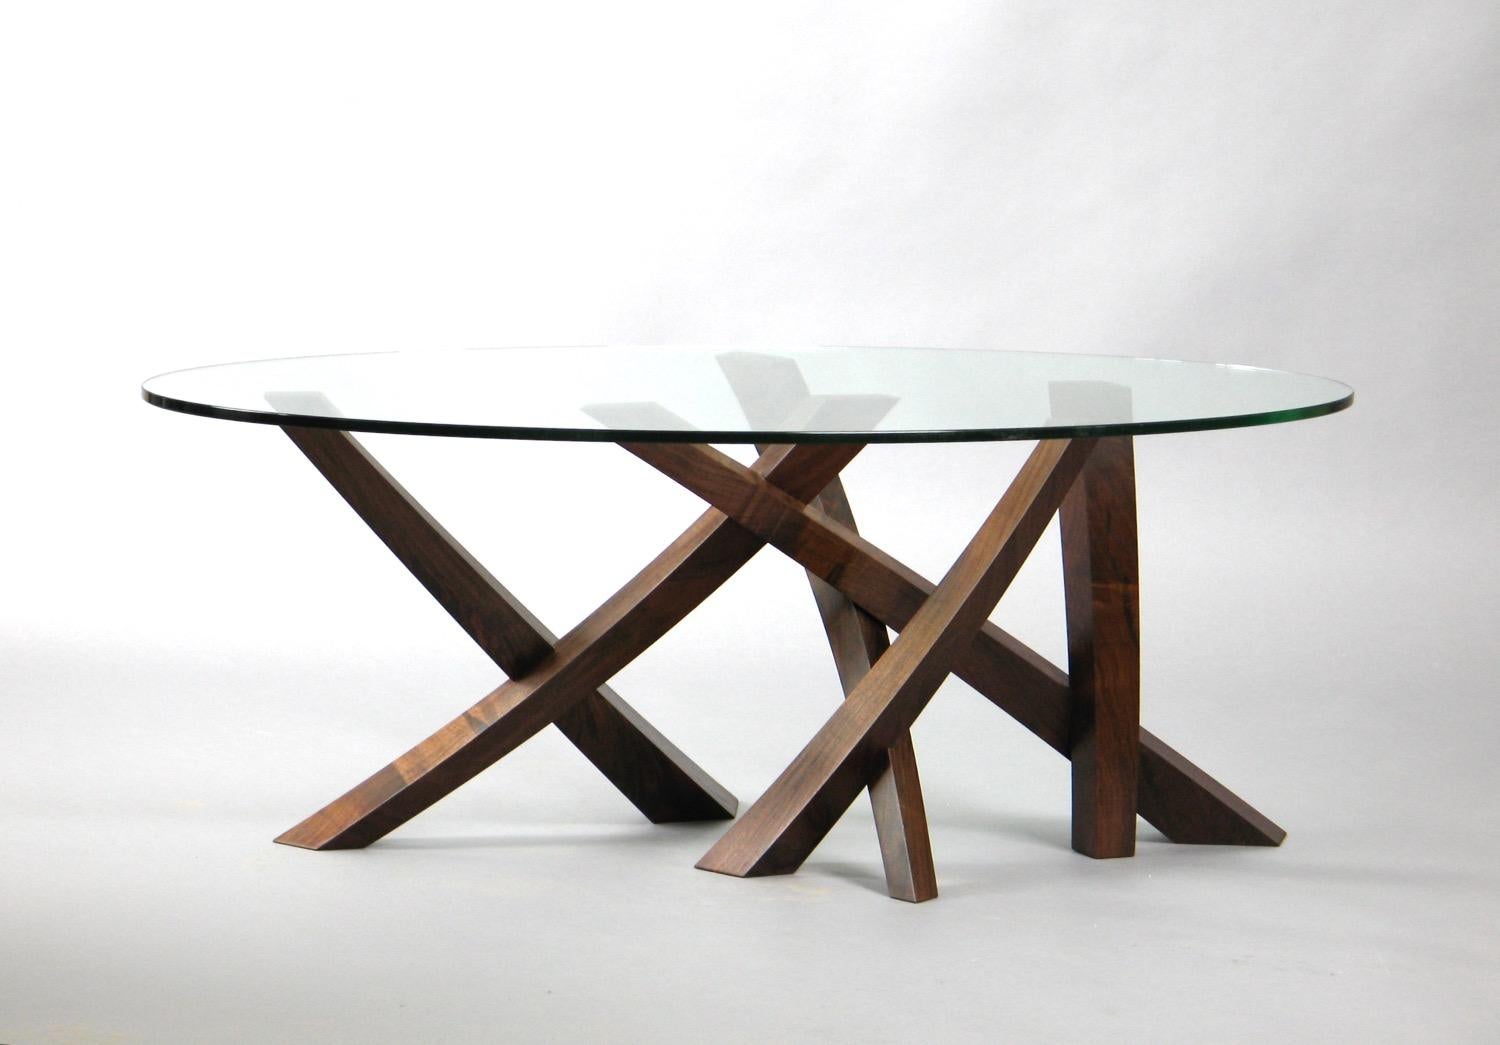 Sculptural Walnut and Glass Coffee Table by Thomas Throop/ Black Creek Designs For Sale 3